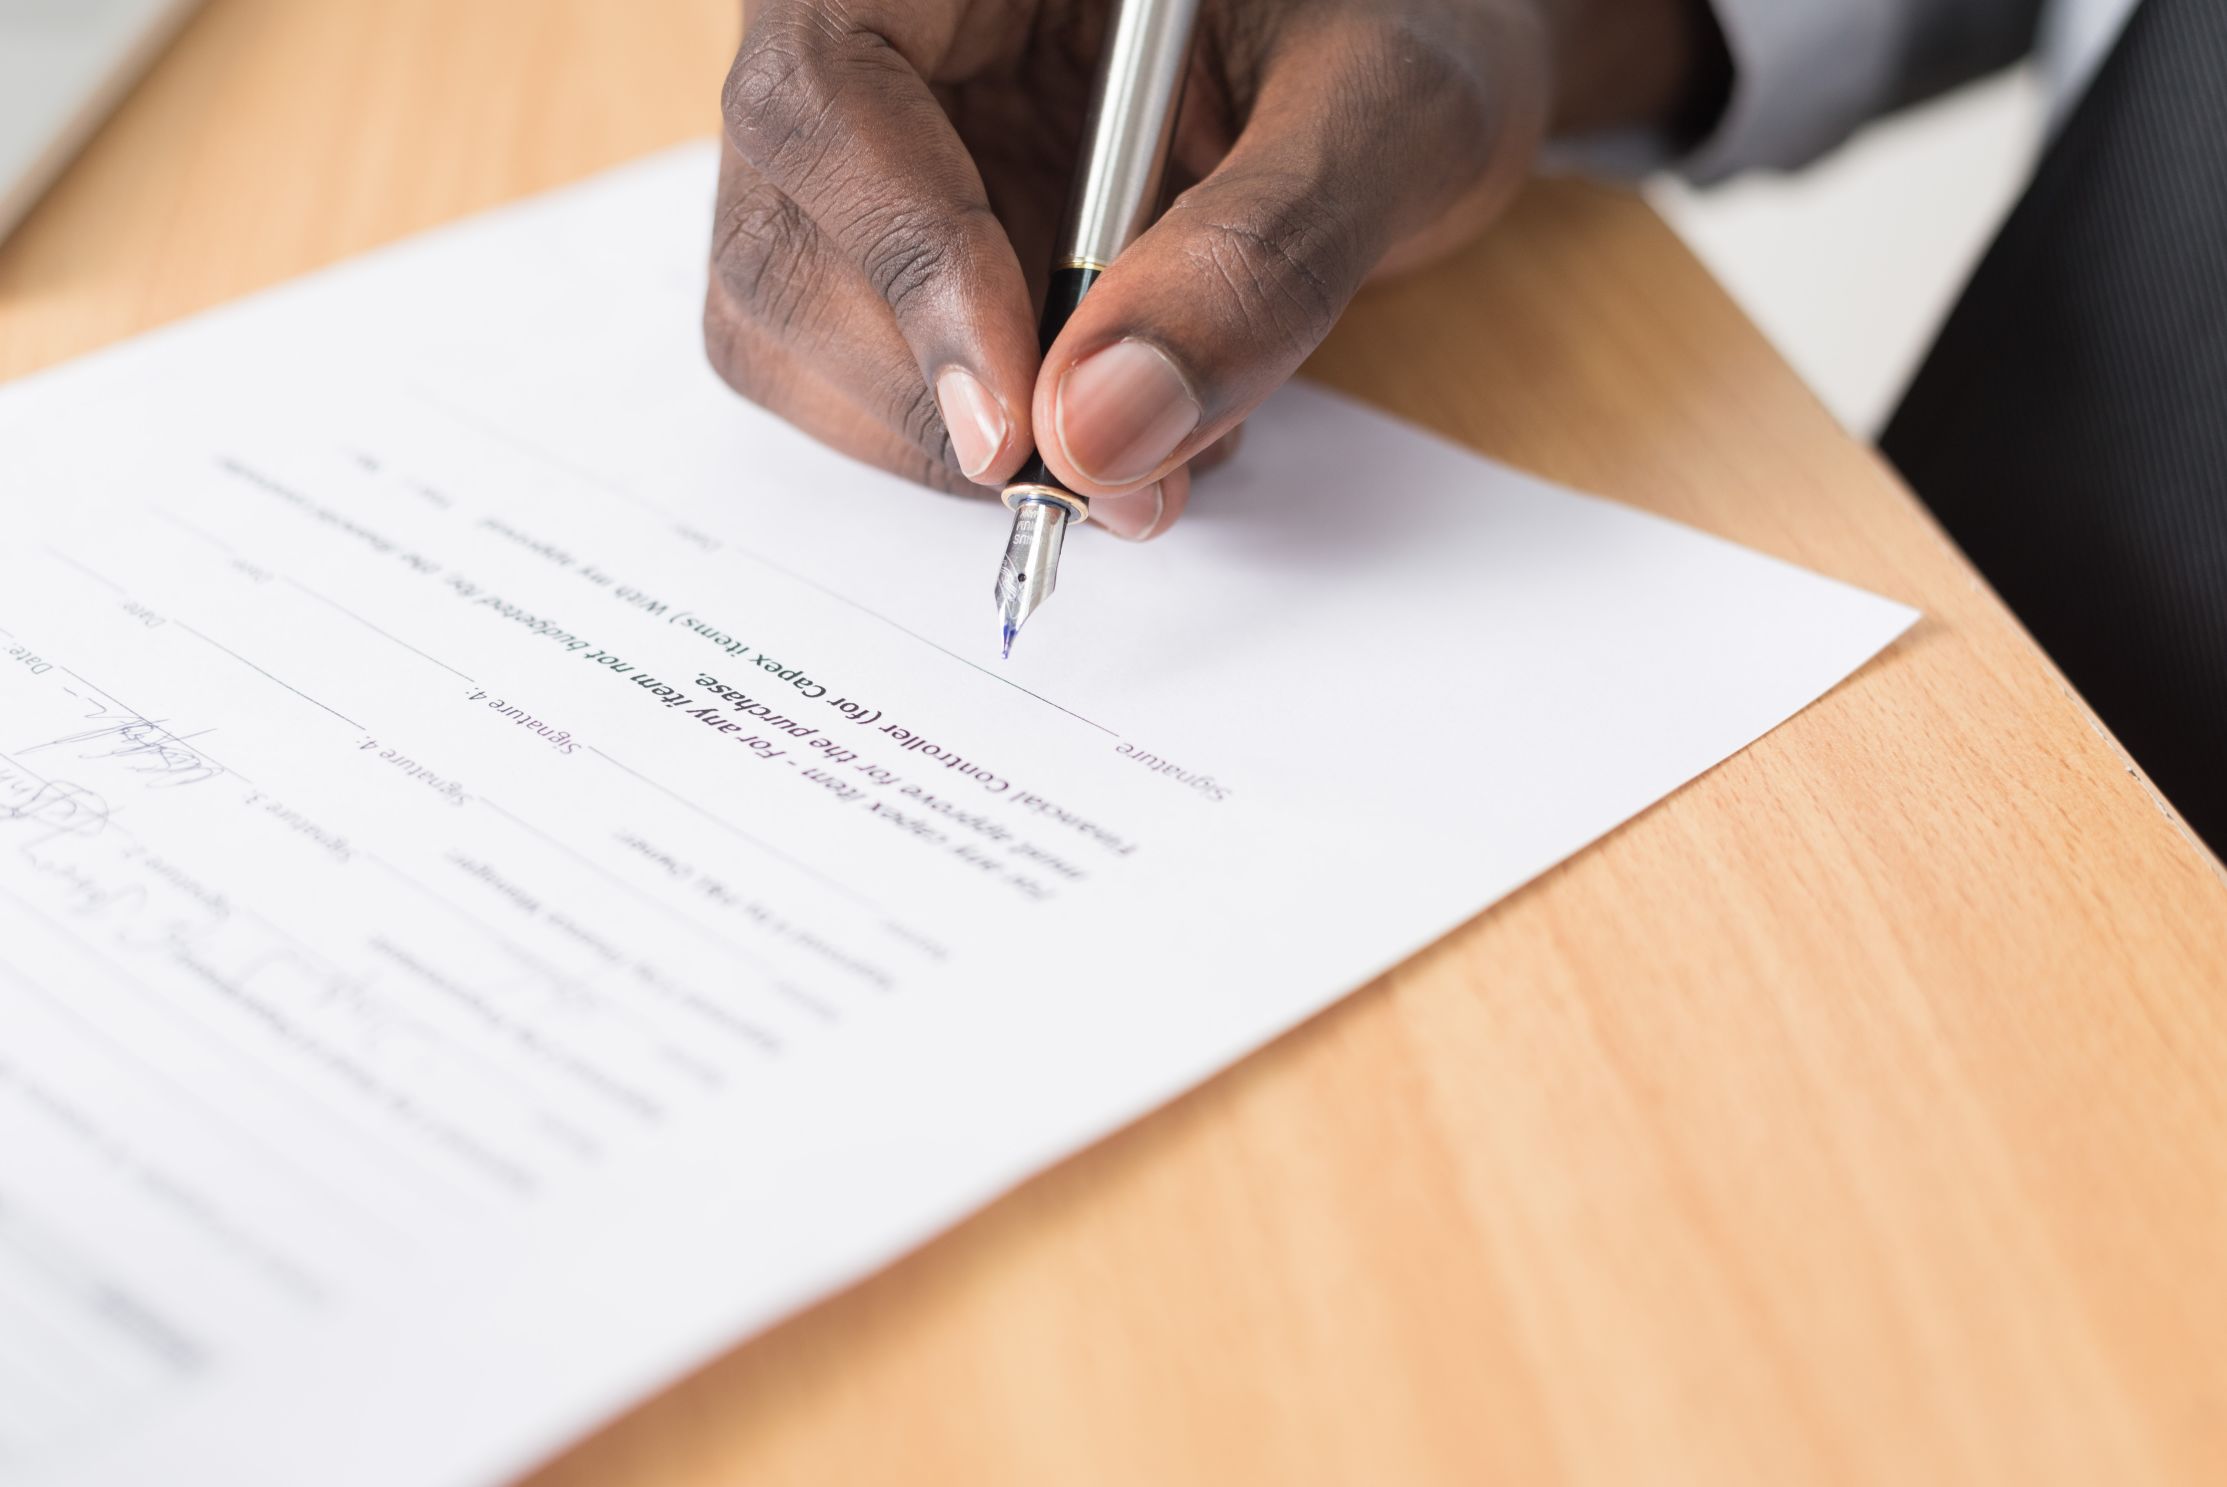 Do’s & Don’ts For a Good Legal Resume